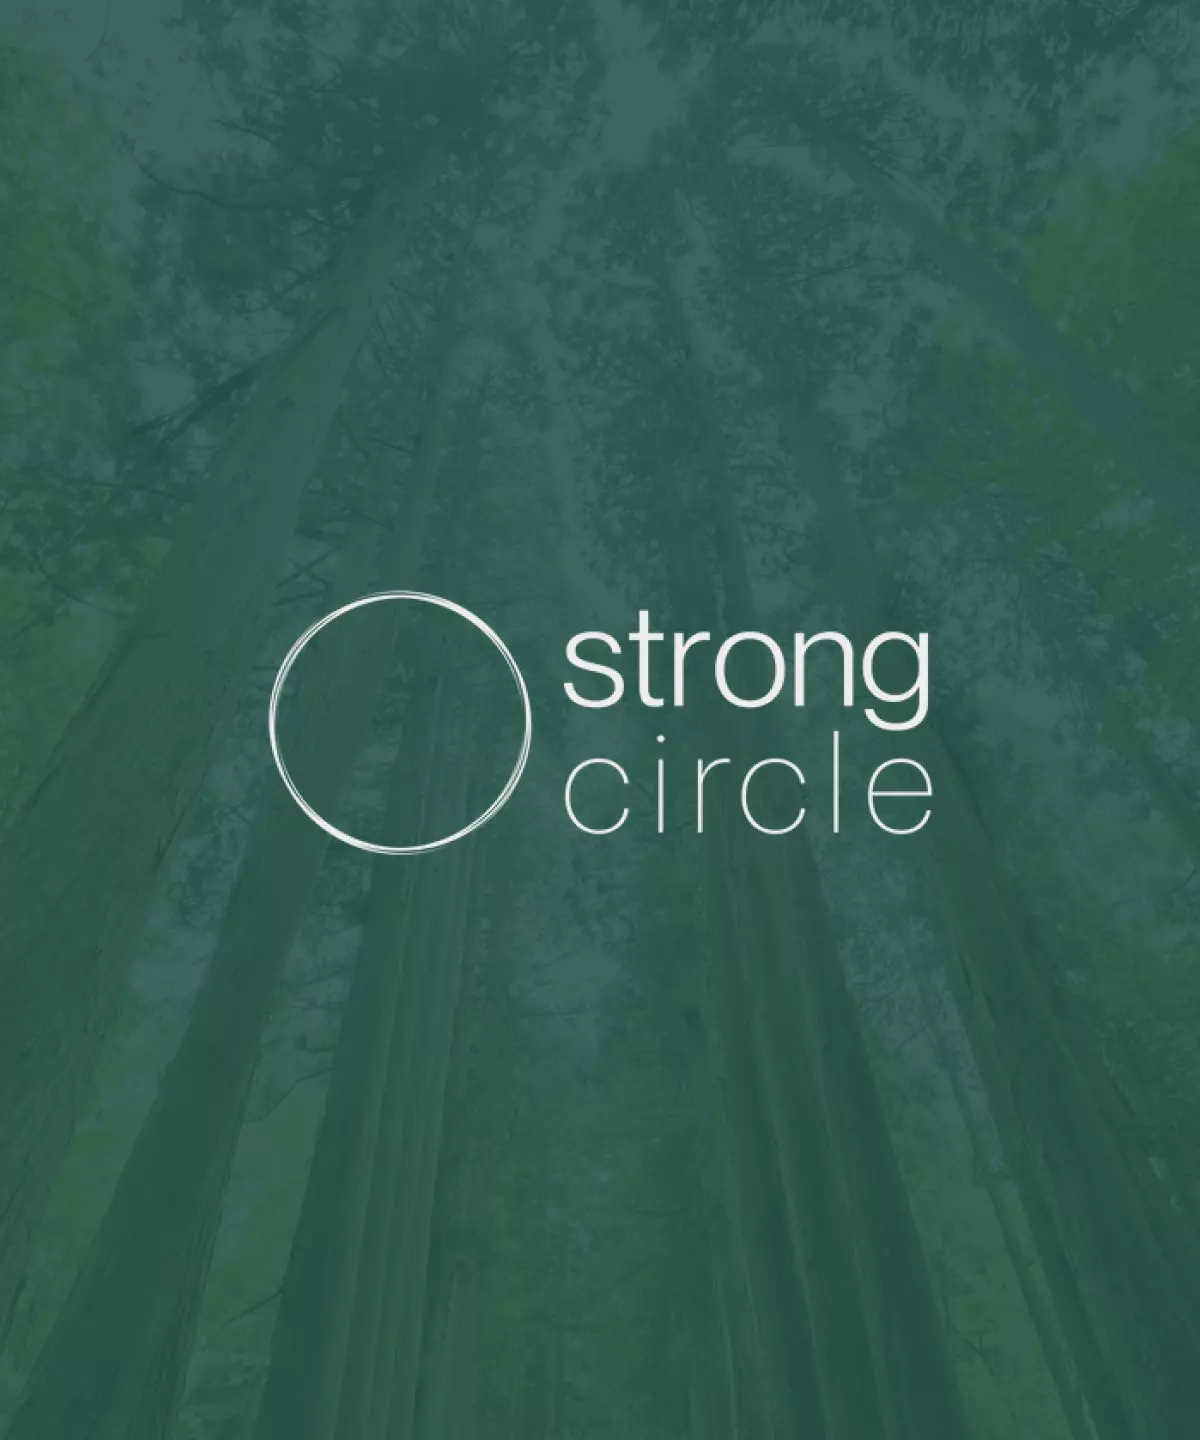 Logo button of Strong Circle over top of an image of pine trees.